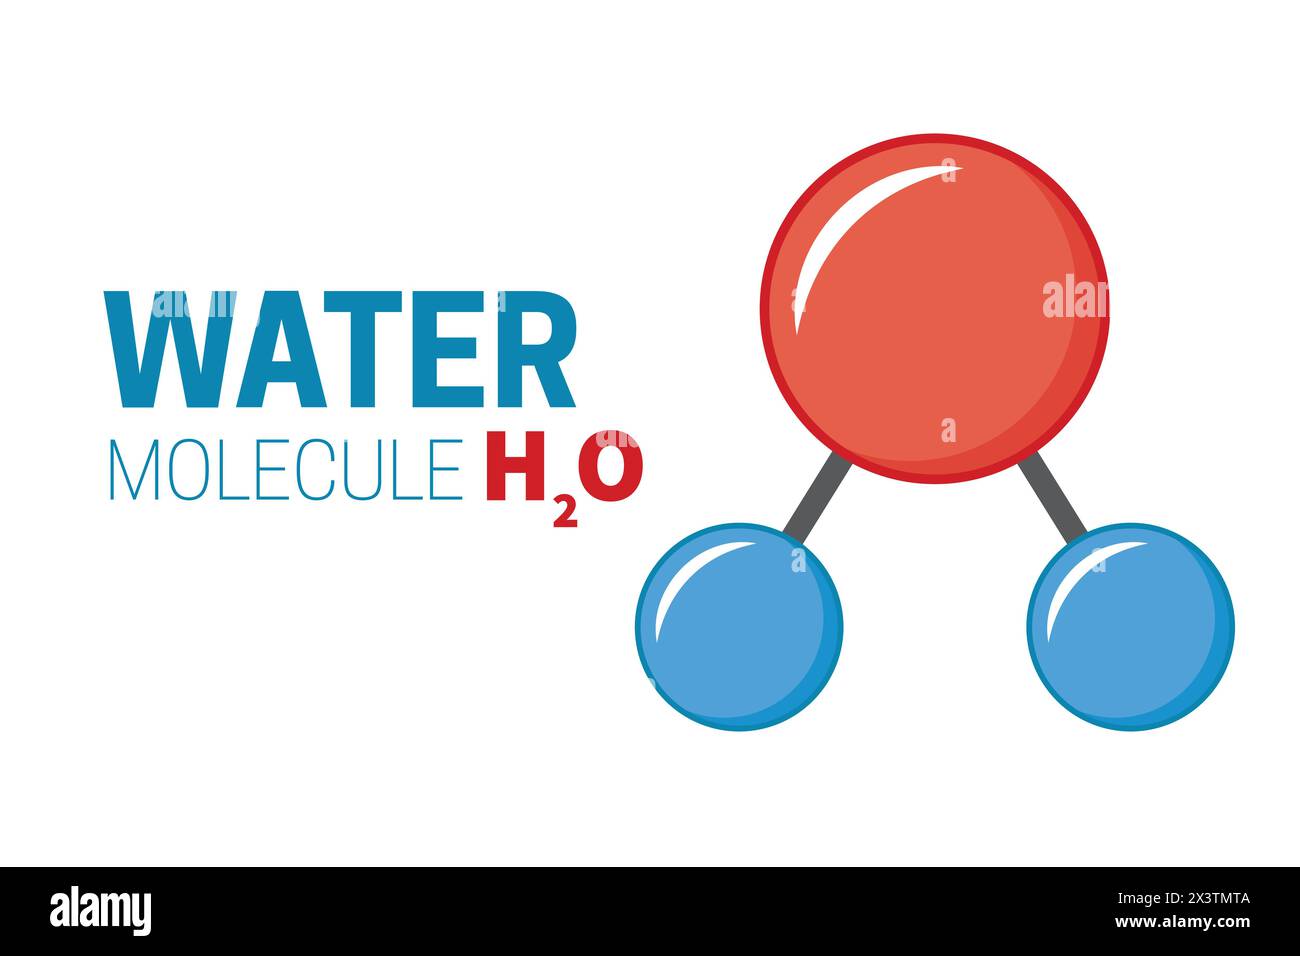 Water Molecule H2O Chemical Structure Illustration Stock Vector